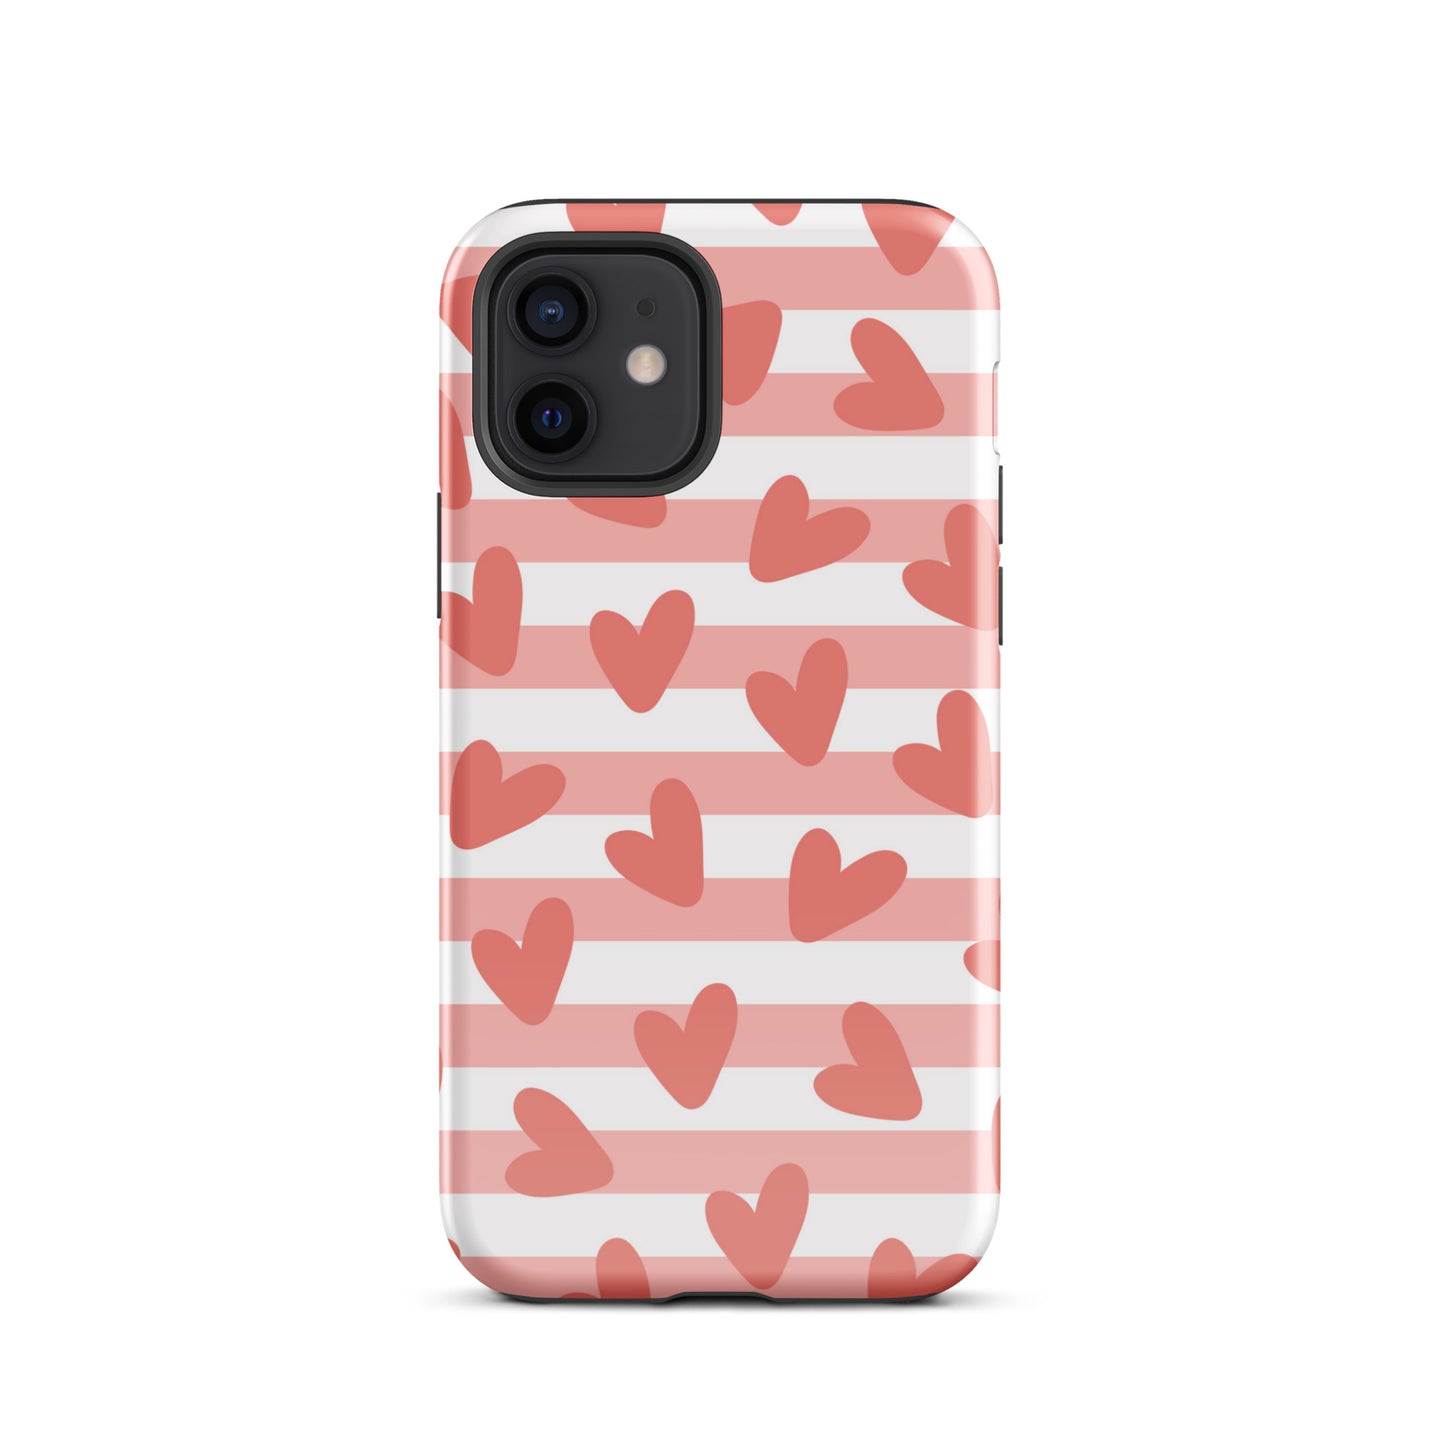 Striped Hearts iPhone Case